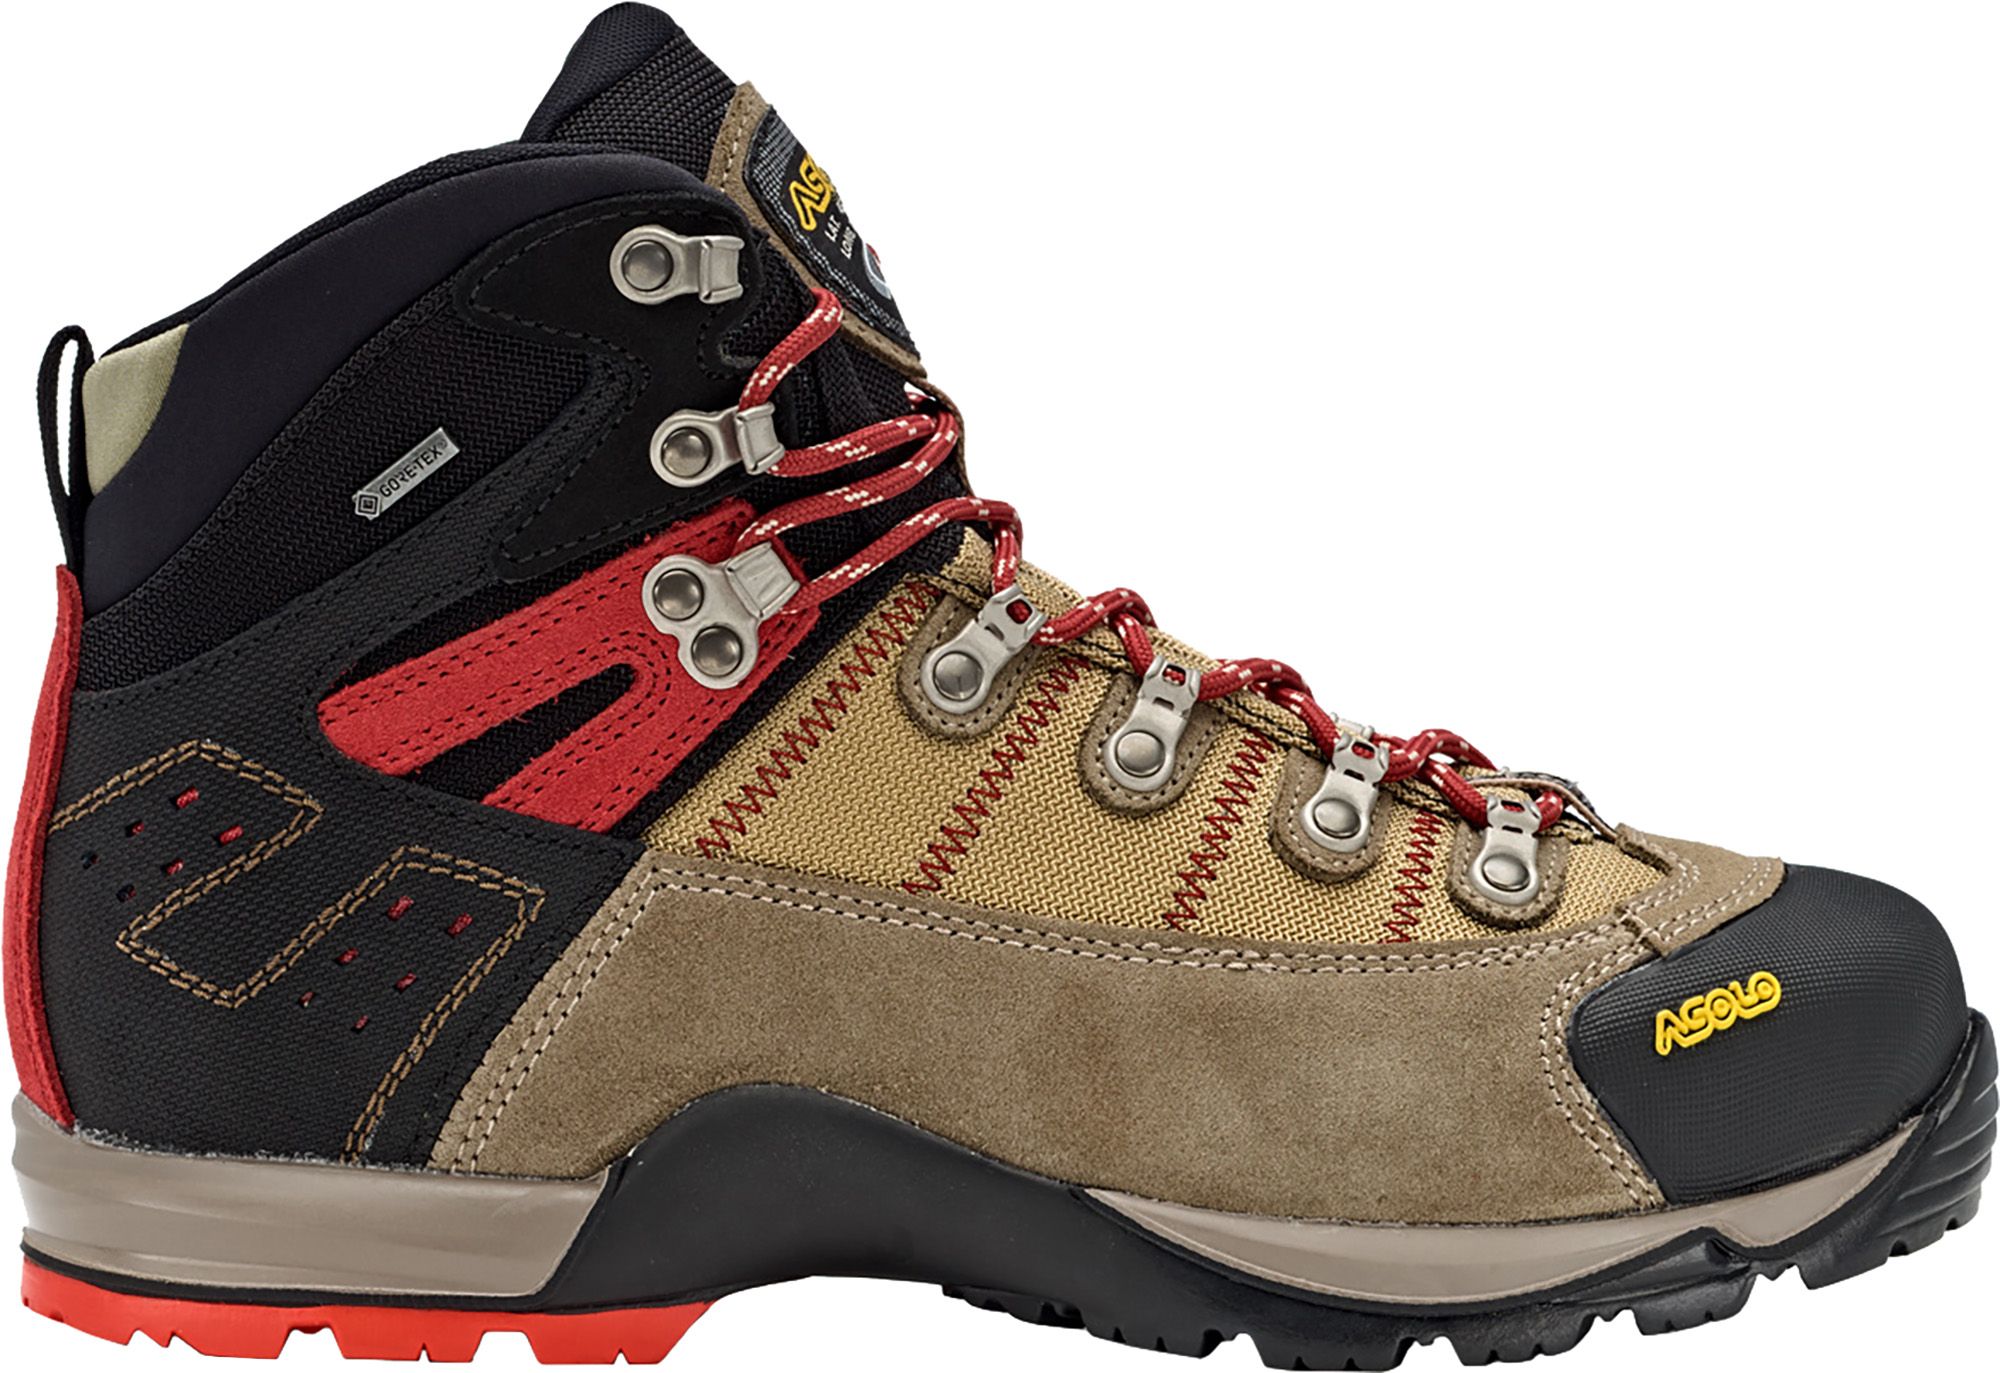 Photos - Trekking Shoes ASOLO Men's Fugitive GTX Hiking Boots, Size 8.5, Wool/Black | Father's Day 